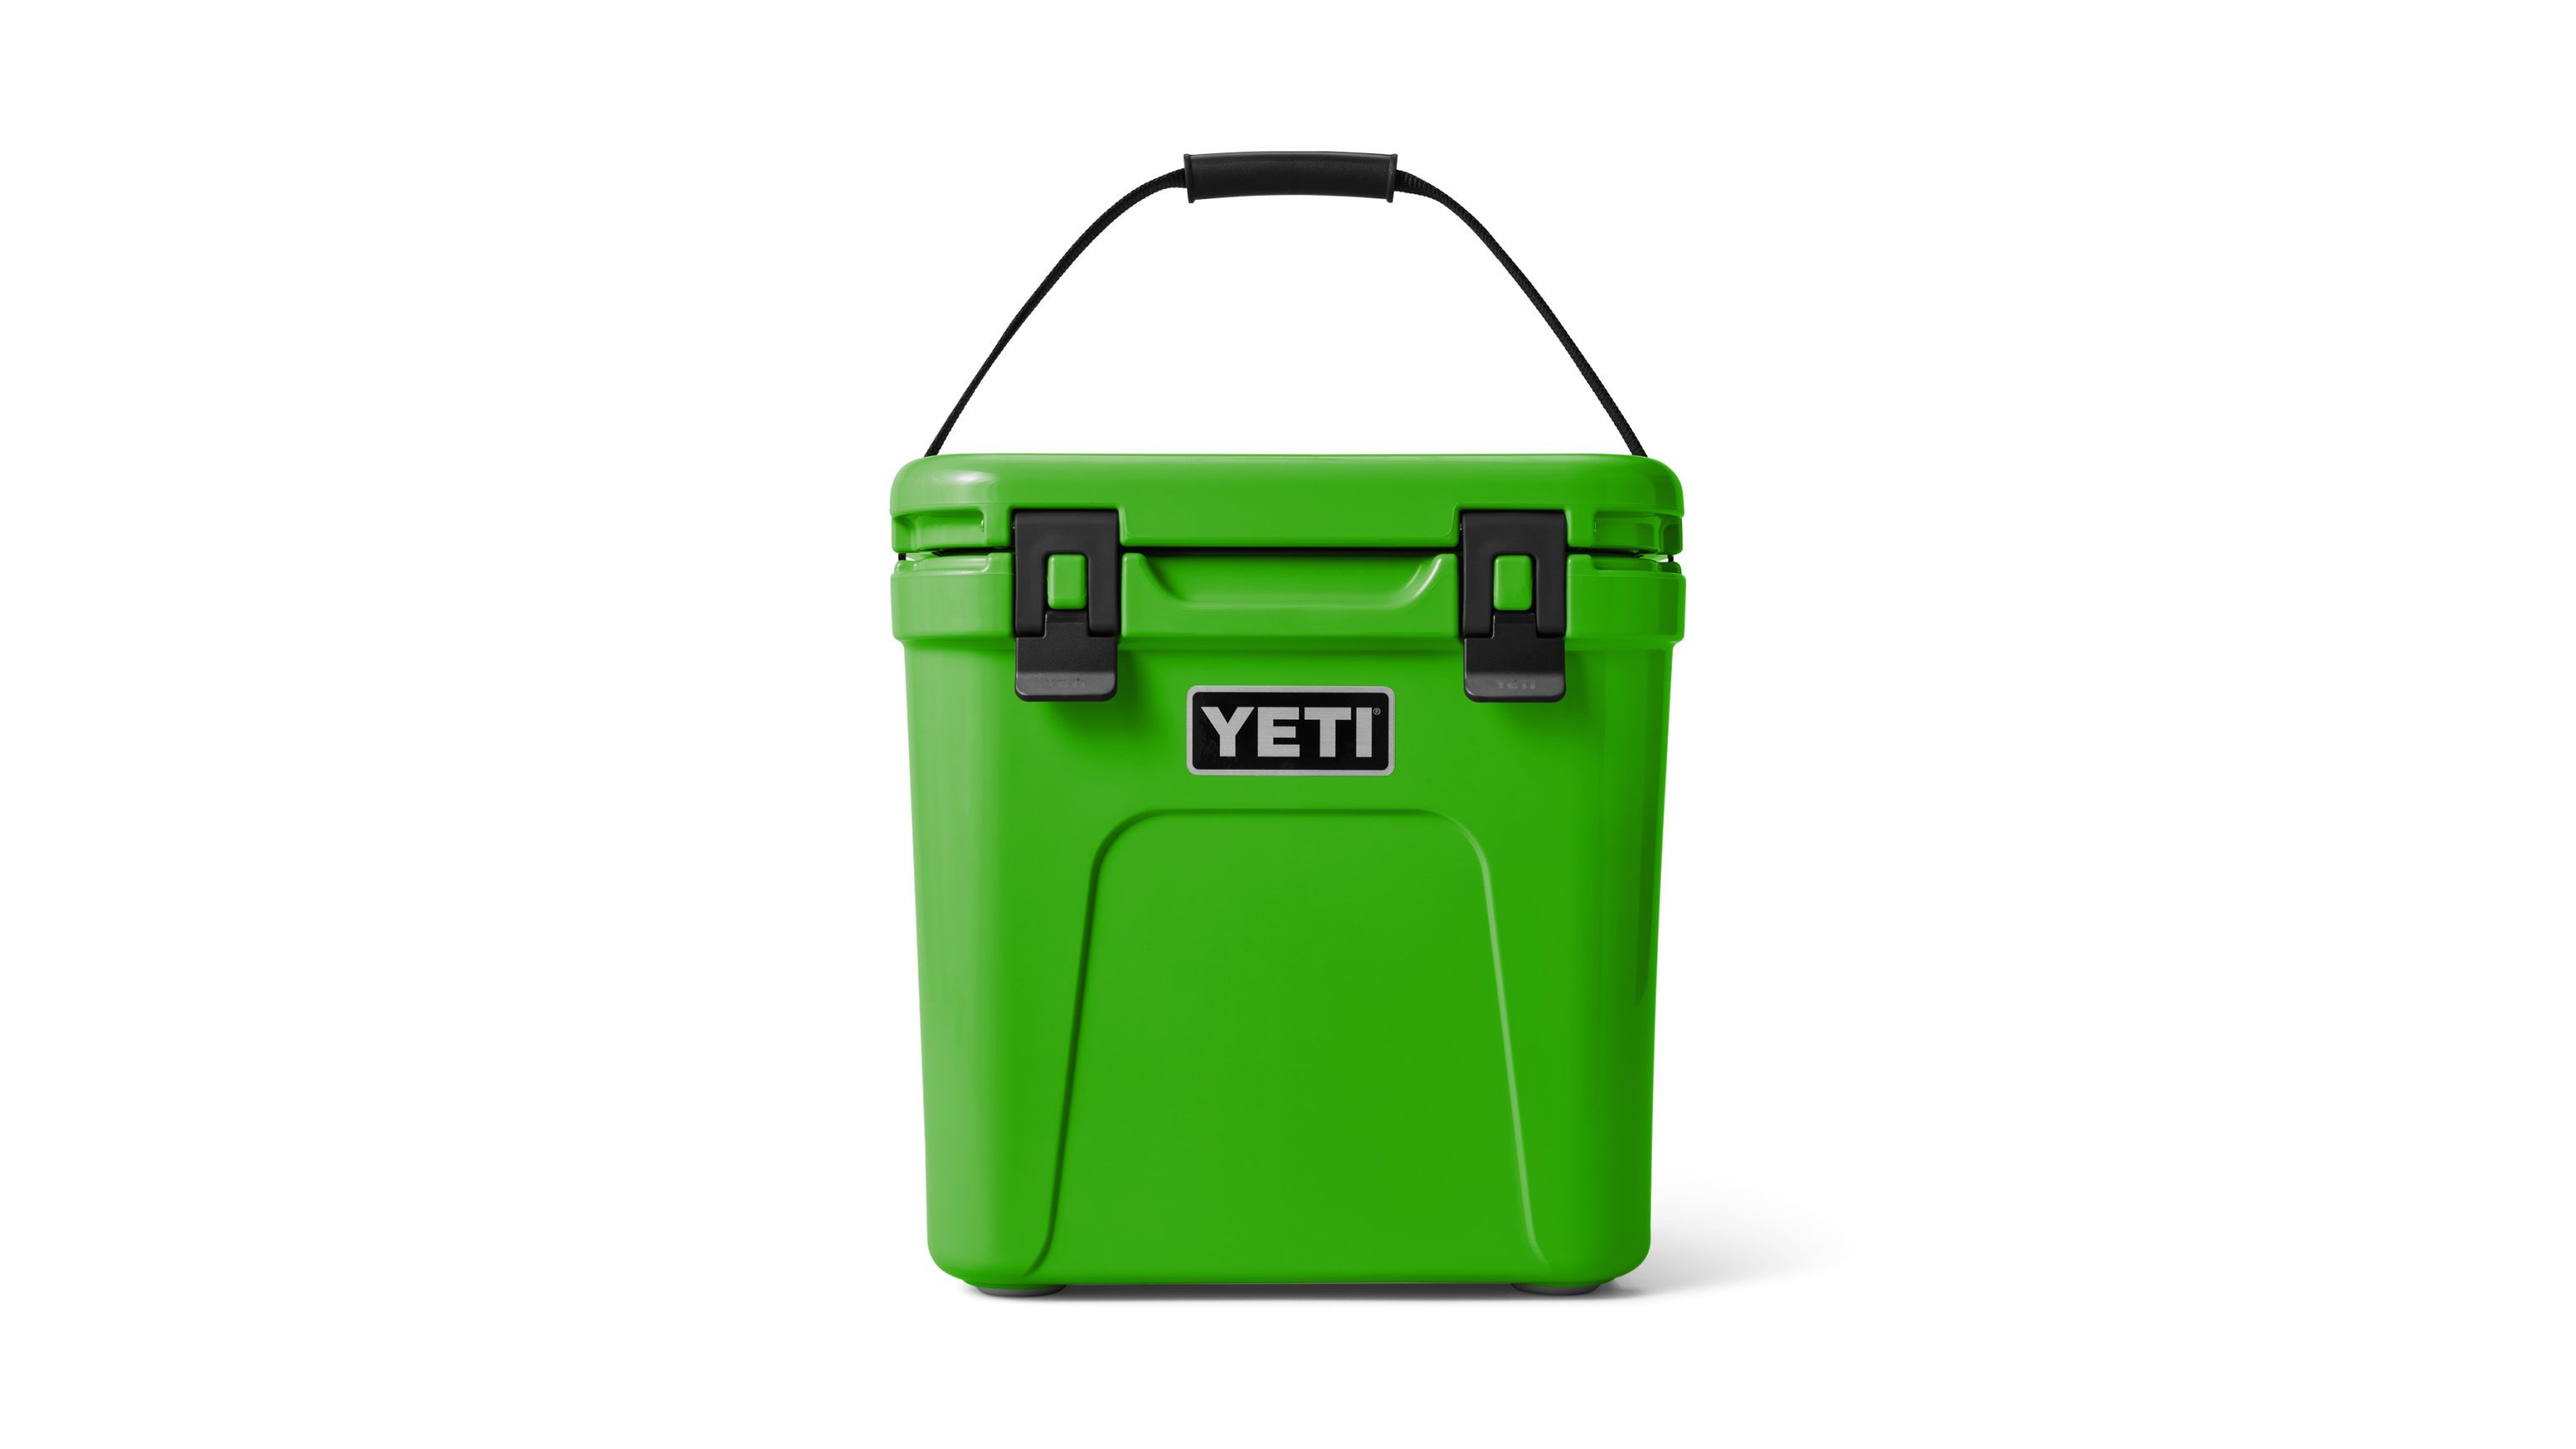 Yeti Coolers Never Go On Sale, But They're Under $200 Today Only​